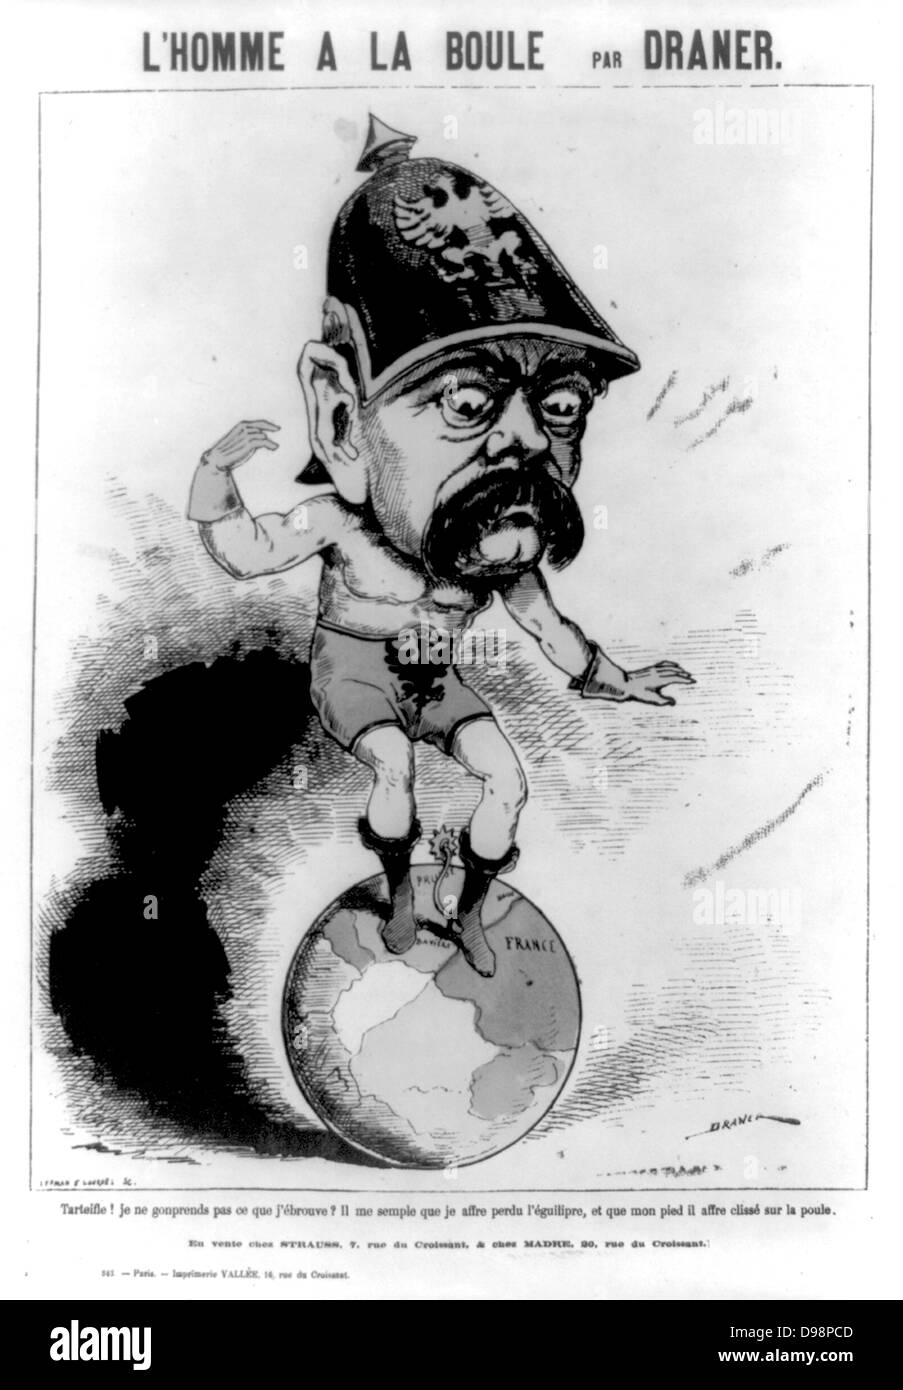 The Man on the Ball': Cartoon of Otto von Bismarck (1815-1898) Prussian statesman, having difficulty balancing on the world. His left foot is on France. French cartoon published during the Franco-Prussian War 1870-1871. German Stock Photo